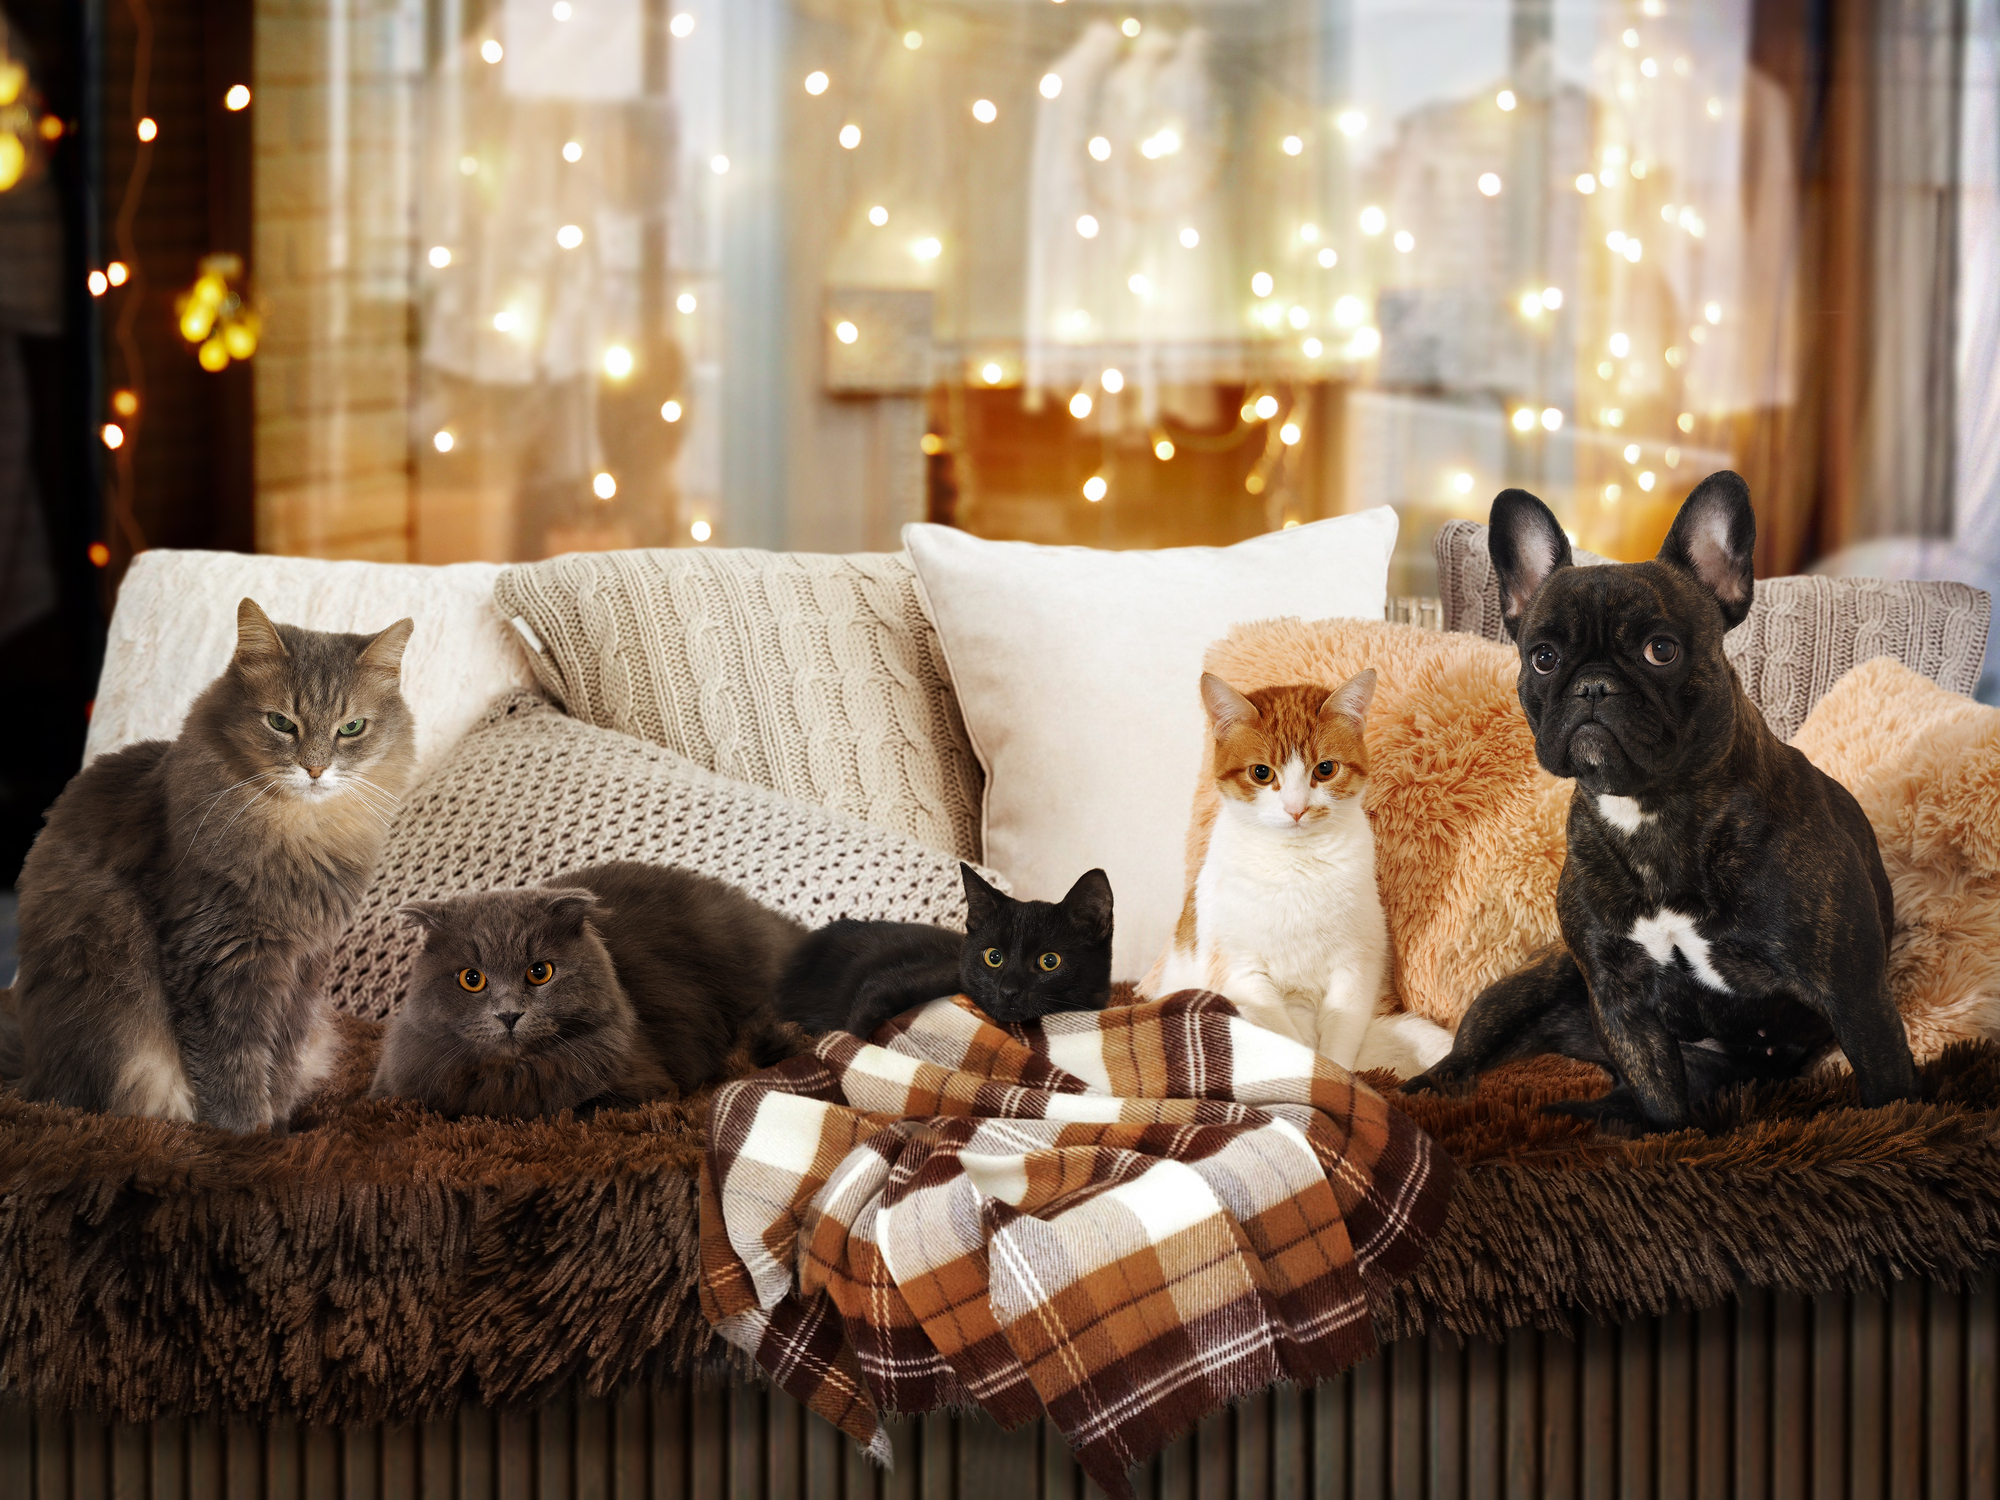 Cats and a dog in a festive interior. Lots of Pets